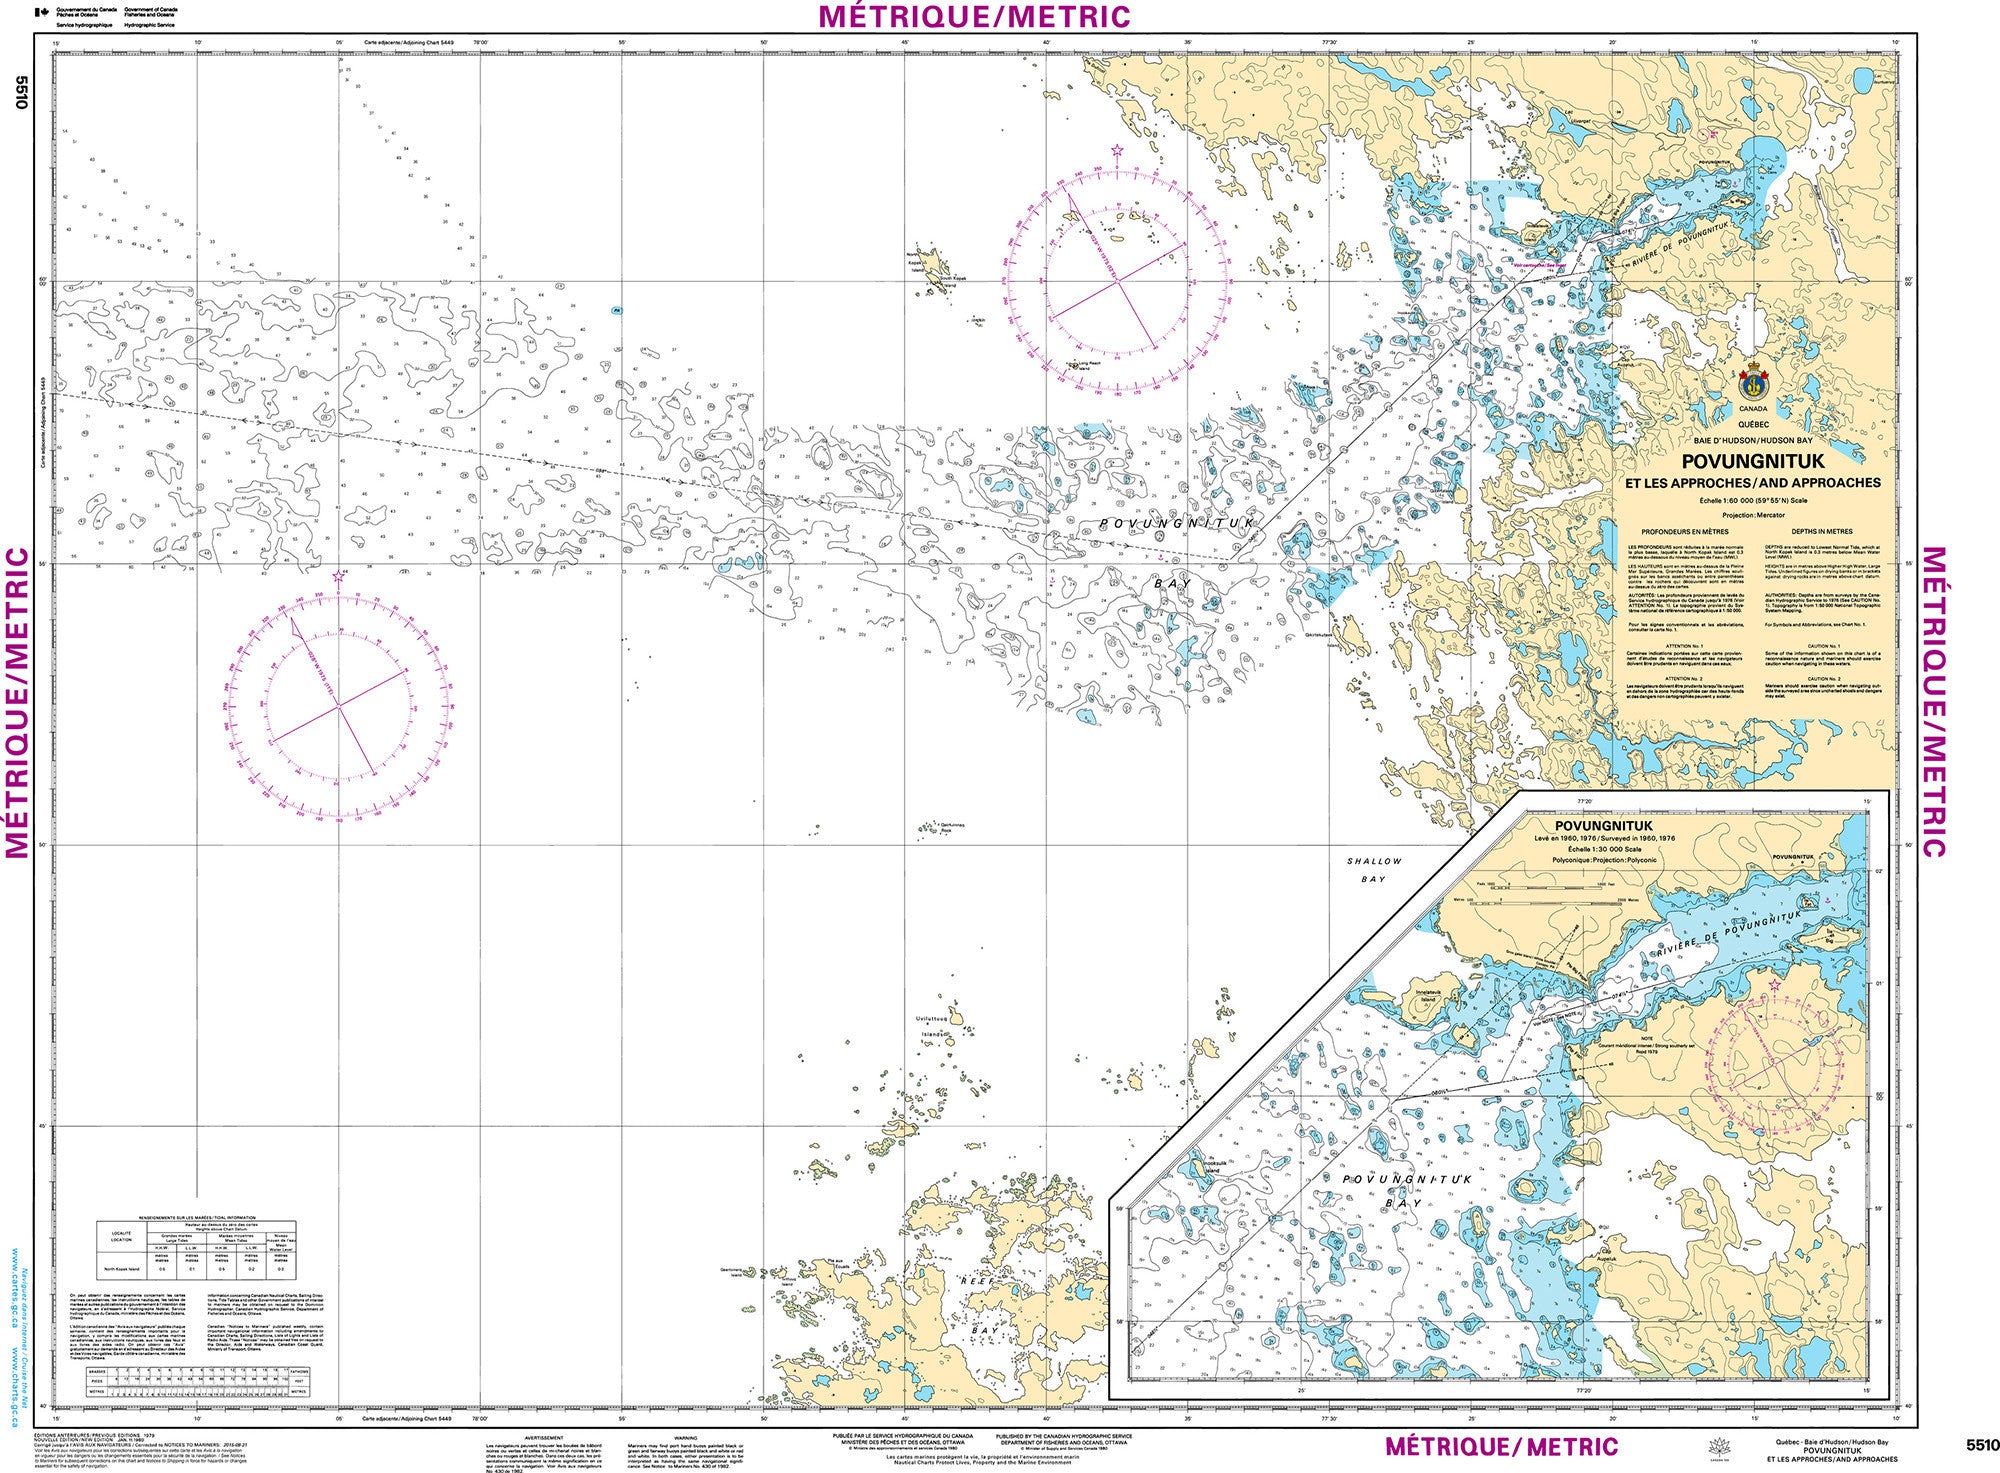 Canadian Hydrographic Service Nautical Chart CHS5510: Povungnituk et les approches/and Approches